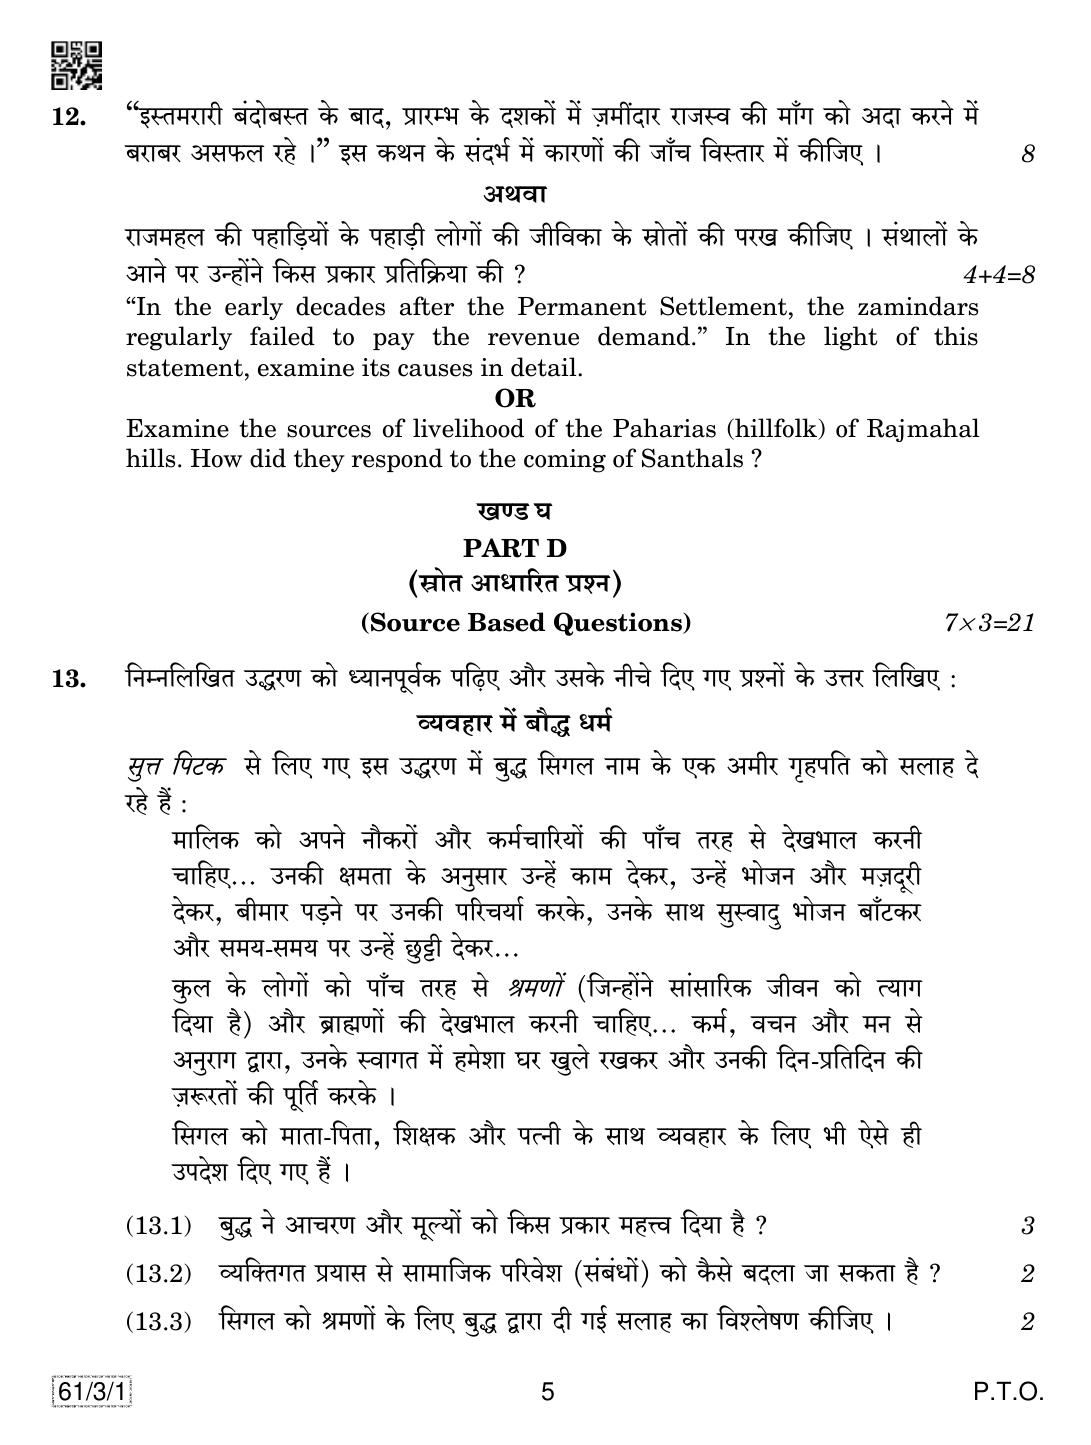 CBSE Class 12 61-3-1 History 2019 Question Paper - Page 5